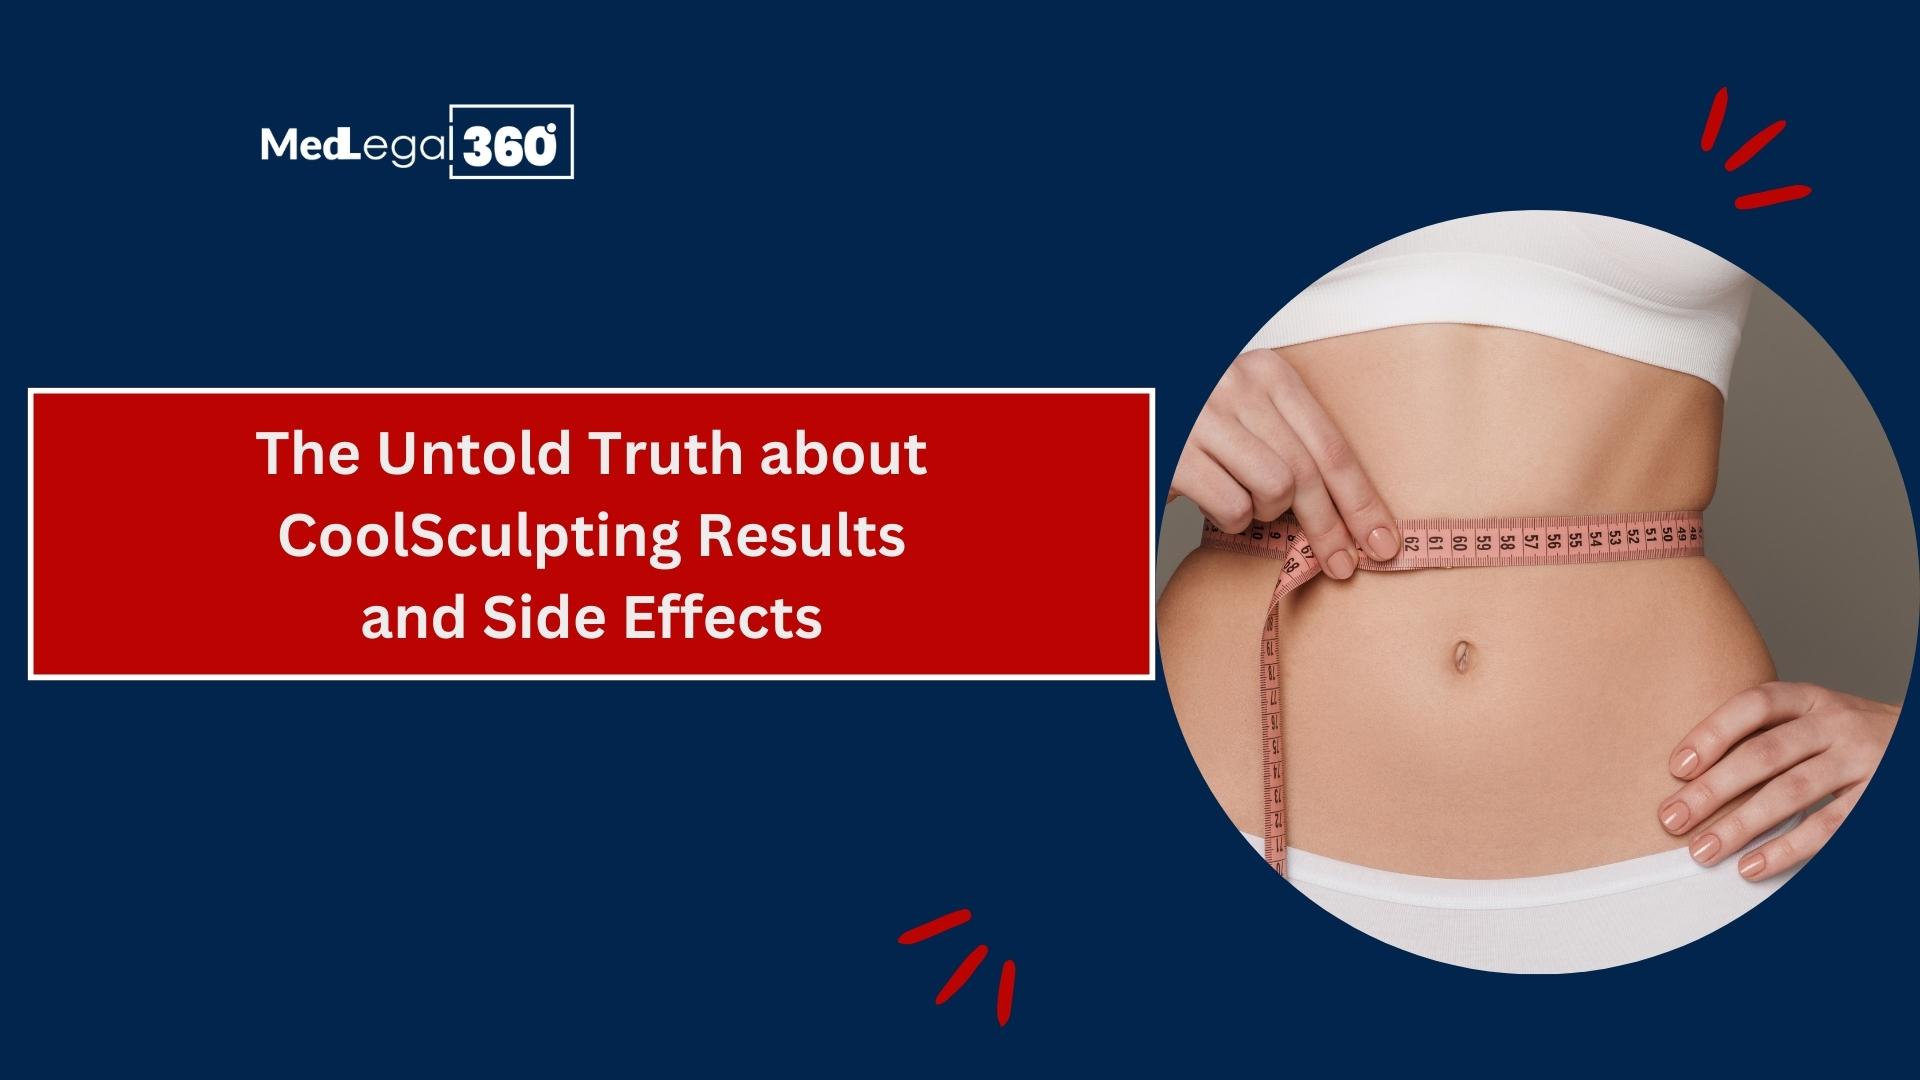 The Untold Truth about CoolSculpting Results and Side Effects